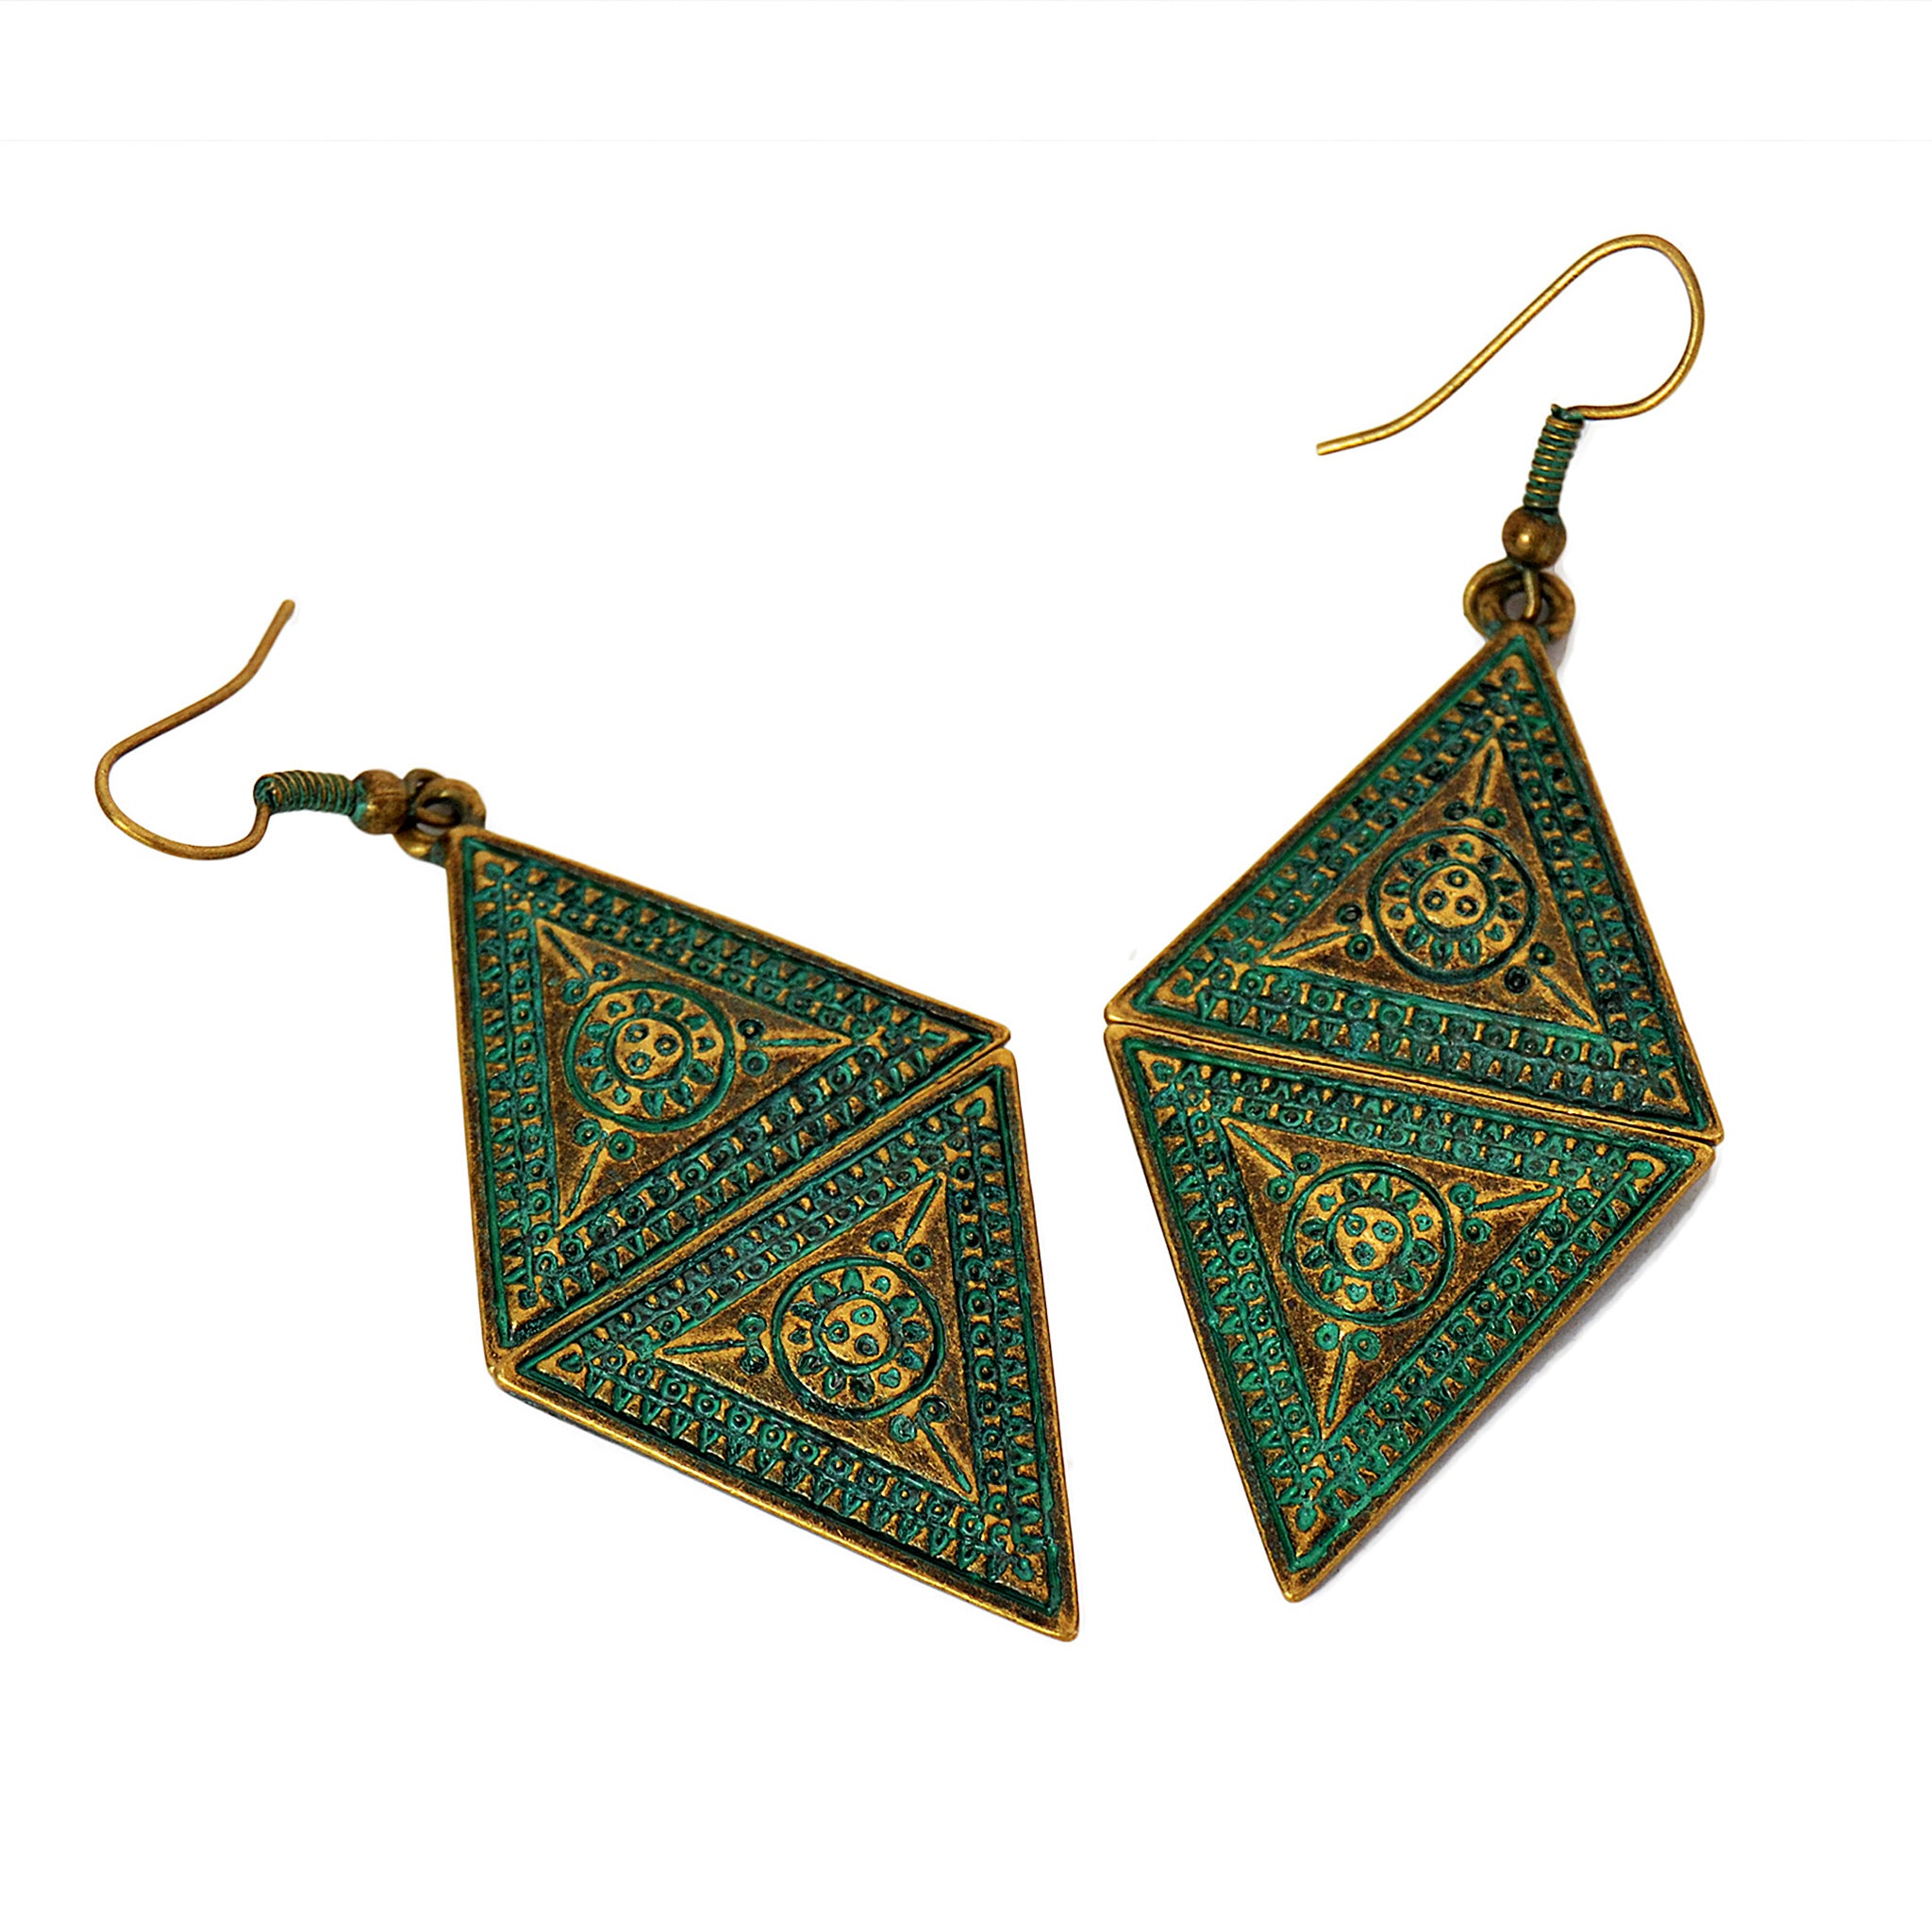 Dangly triangle earrings with tribal aztec design and old green patina on brass